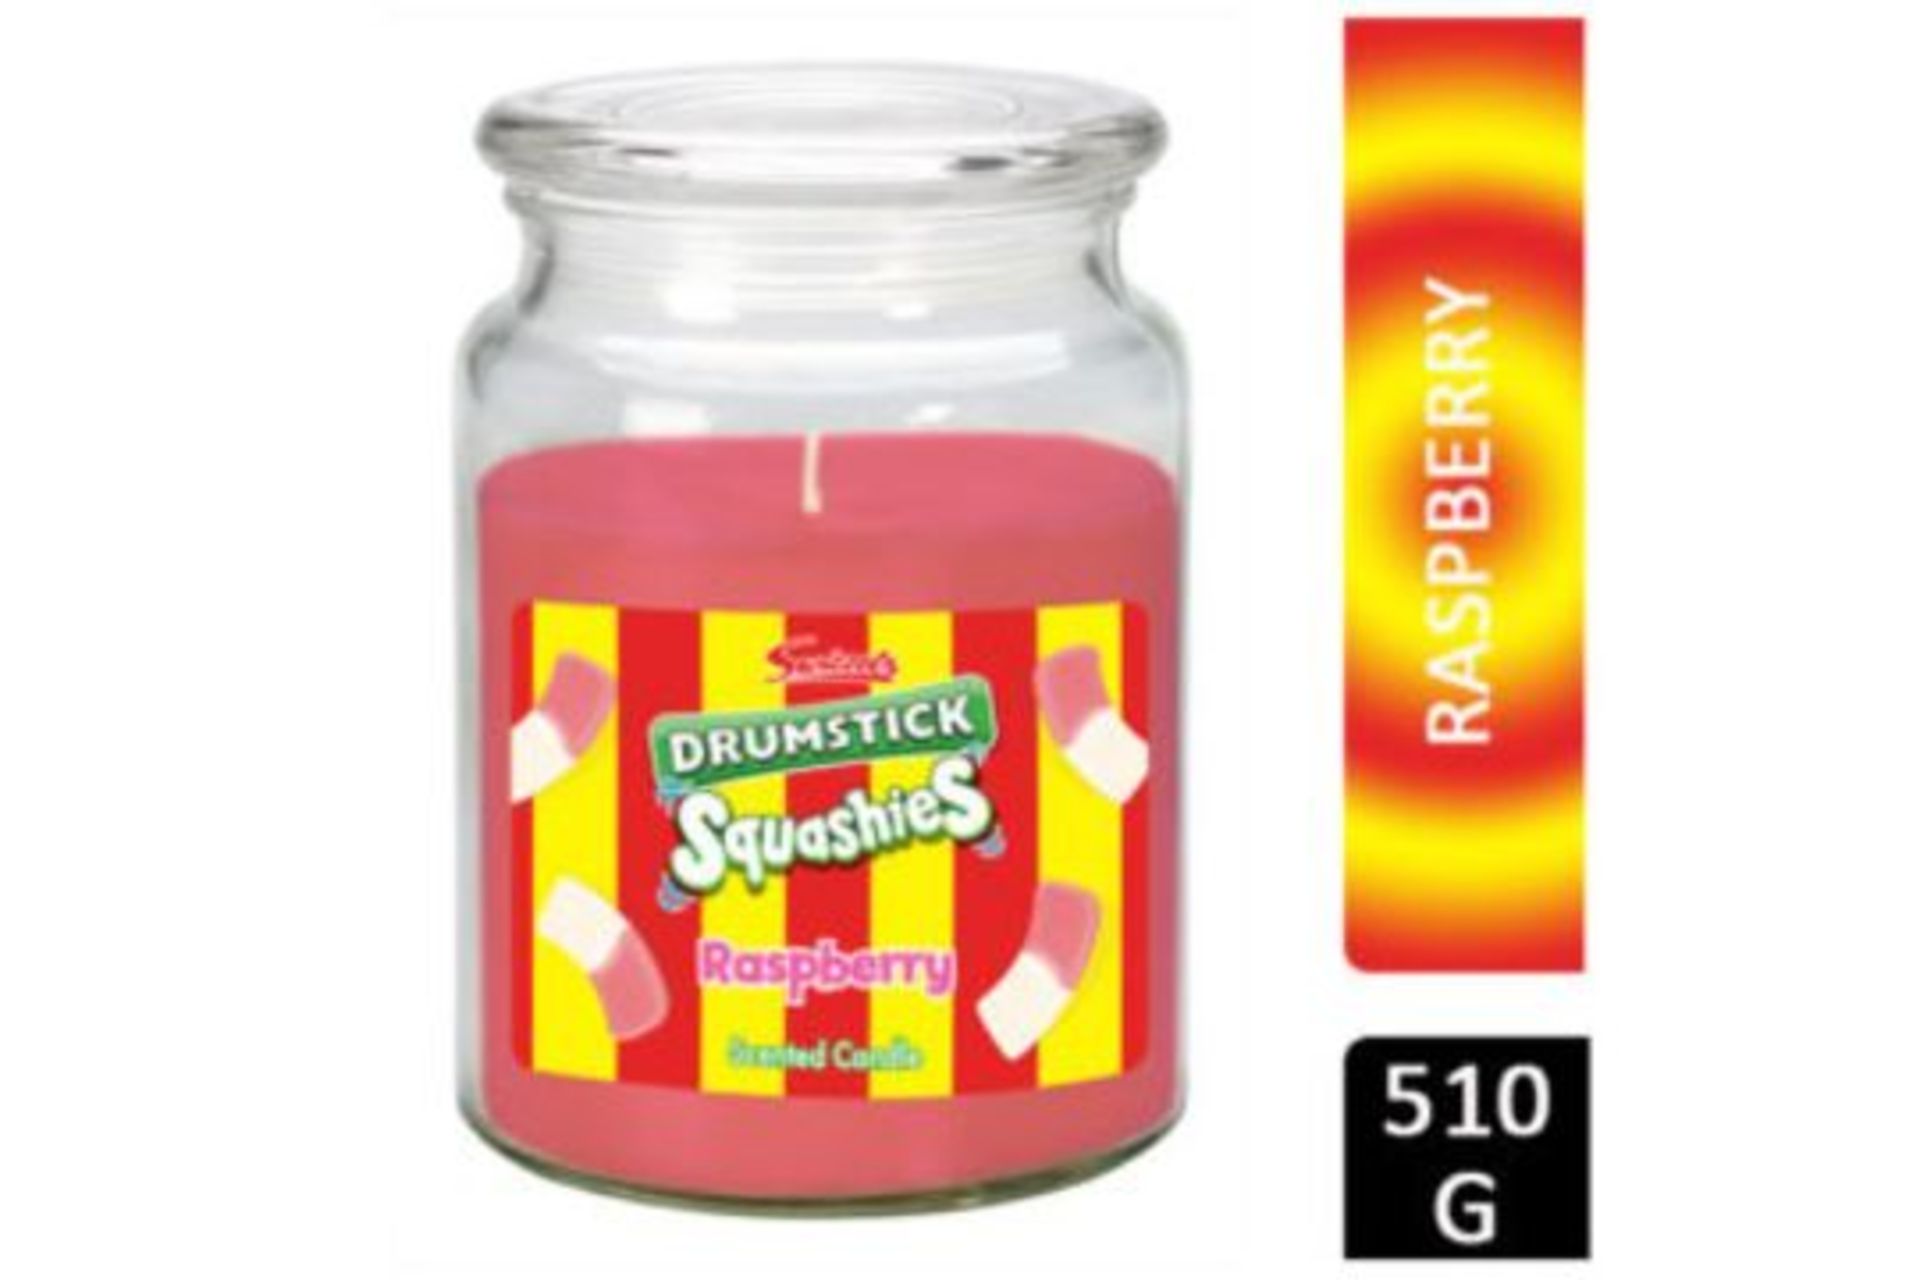 Swizzle 14cm Drumstic Squshies Rasperry Scented Candle